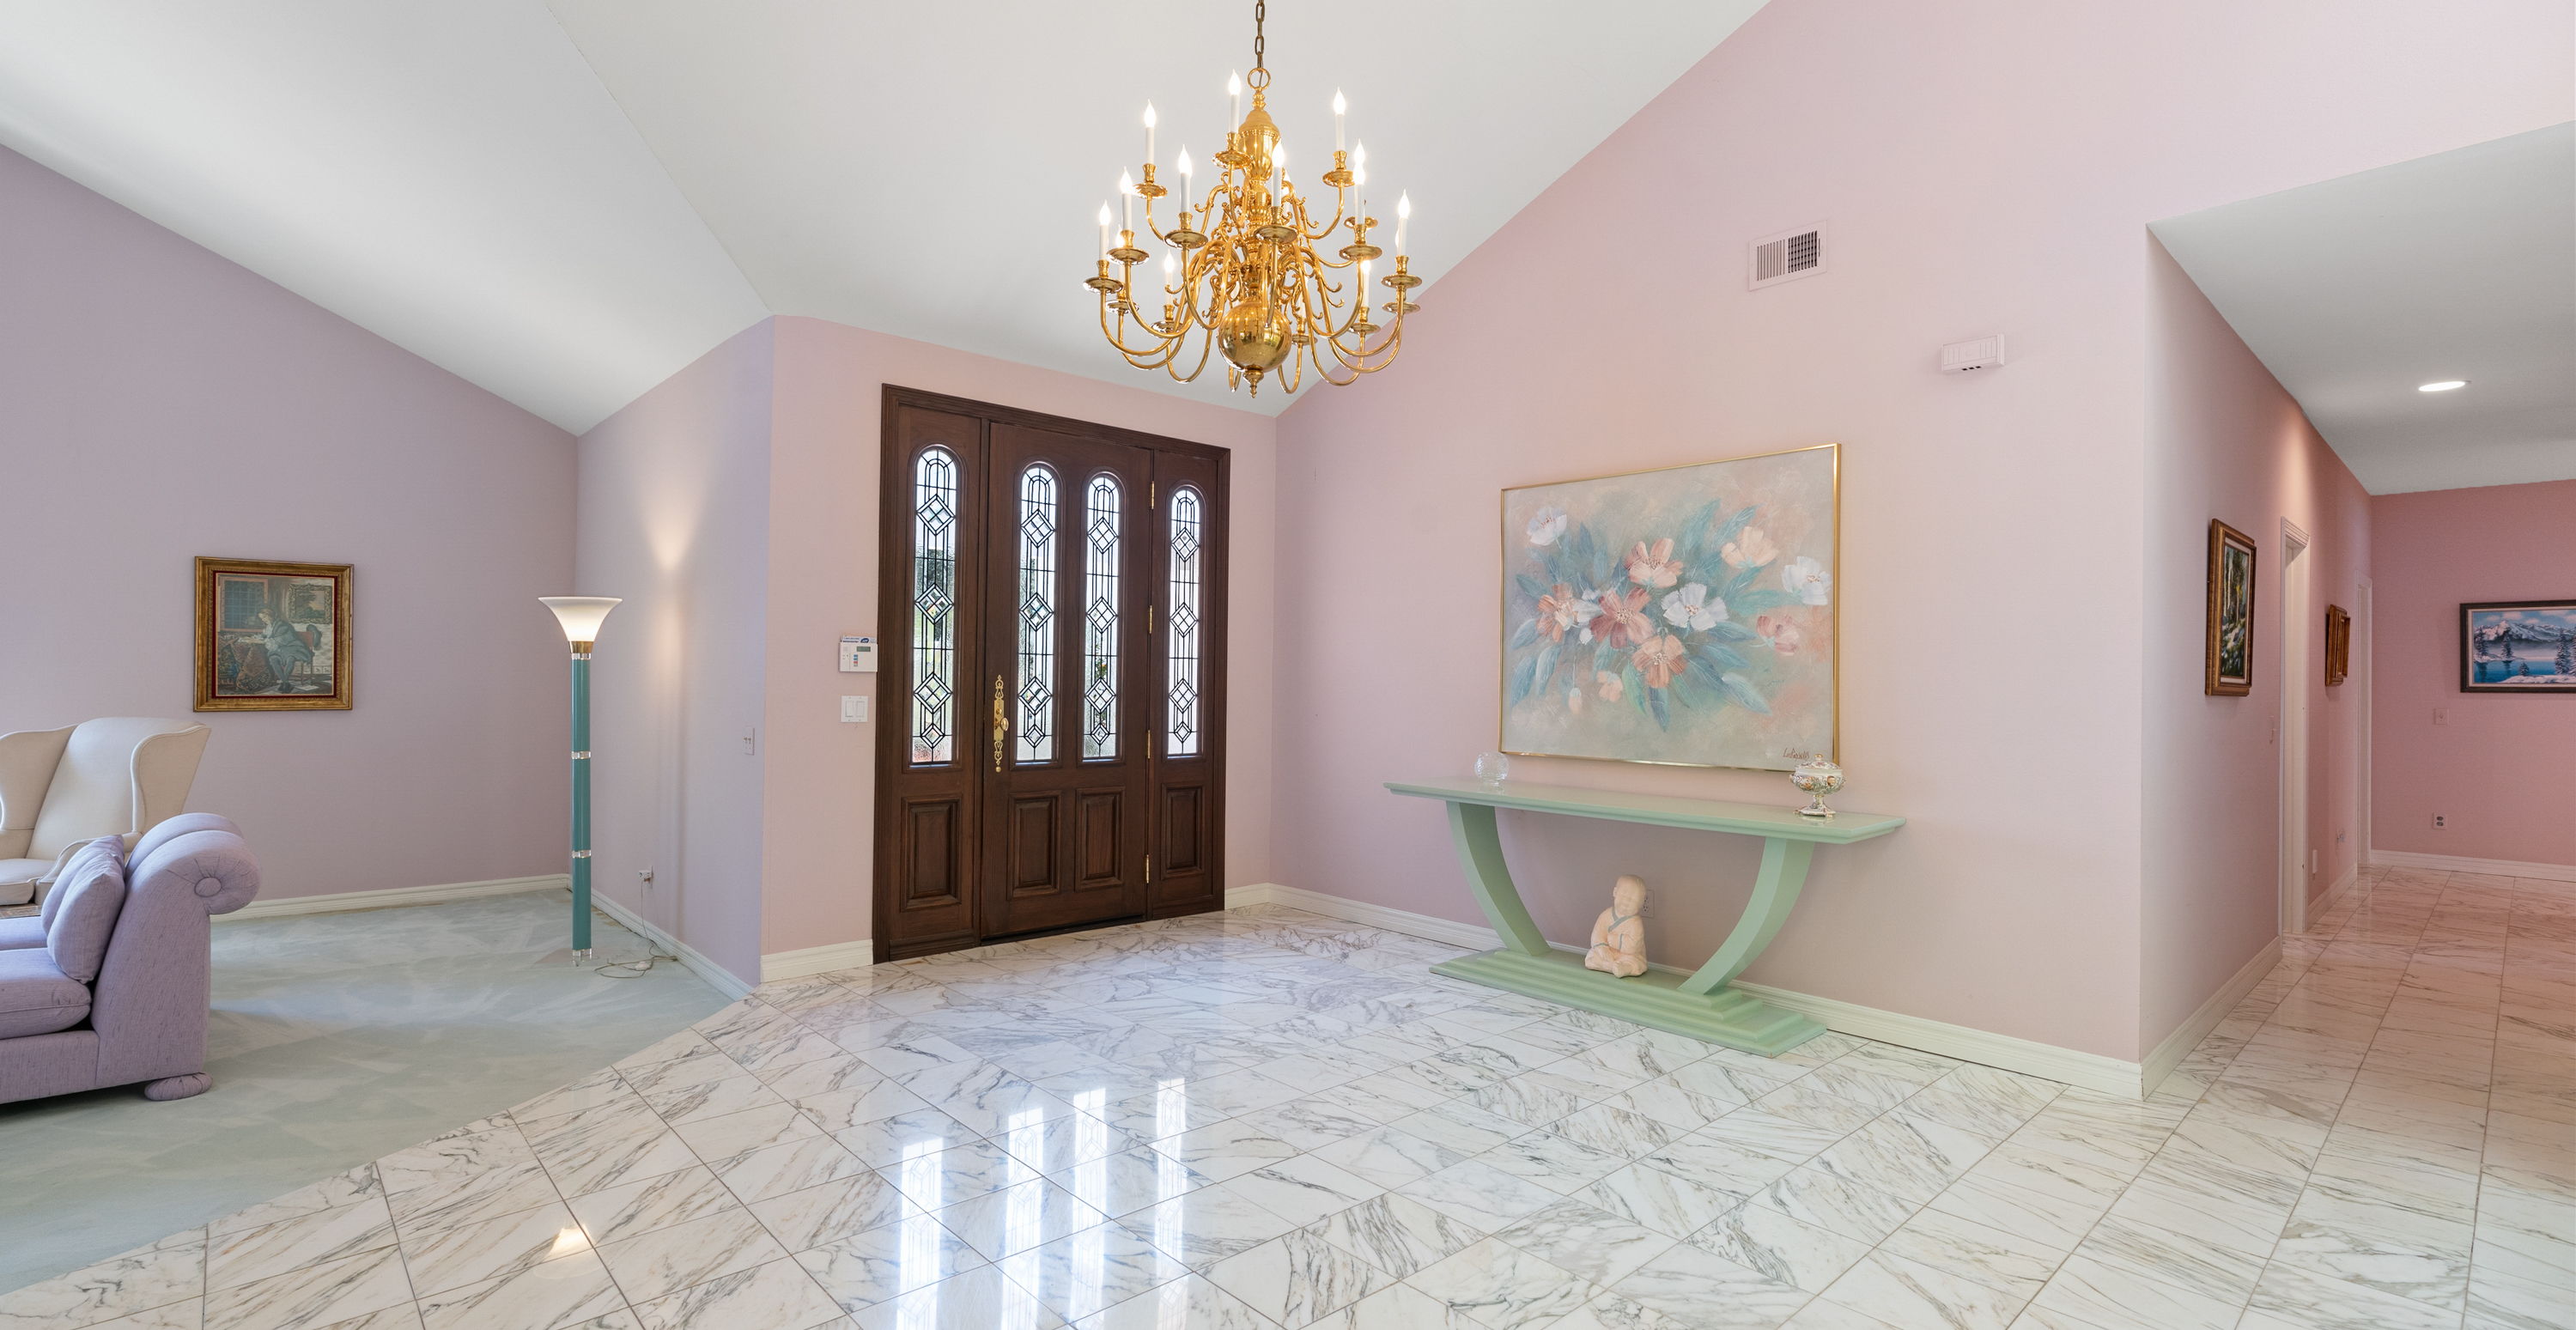 entryway with vaulted ceiling, tile floors, and a notable chandelier